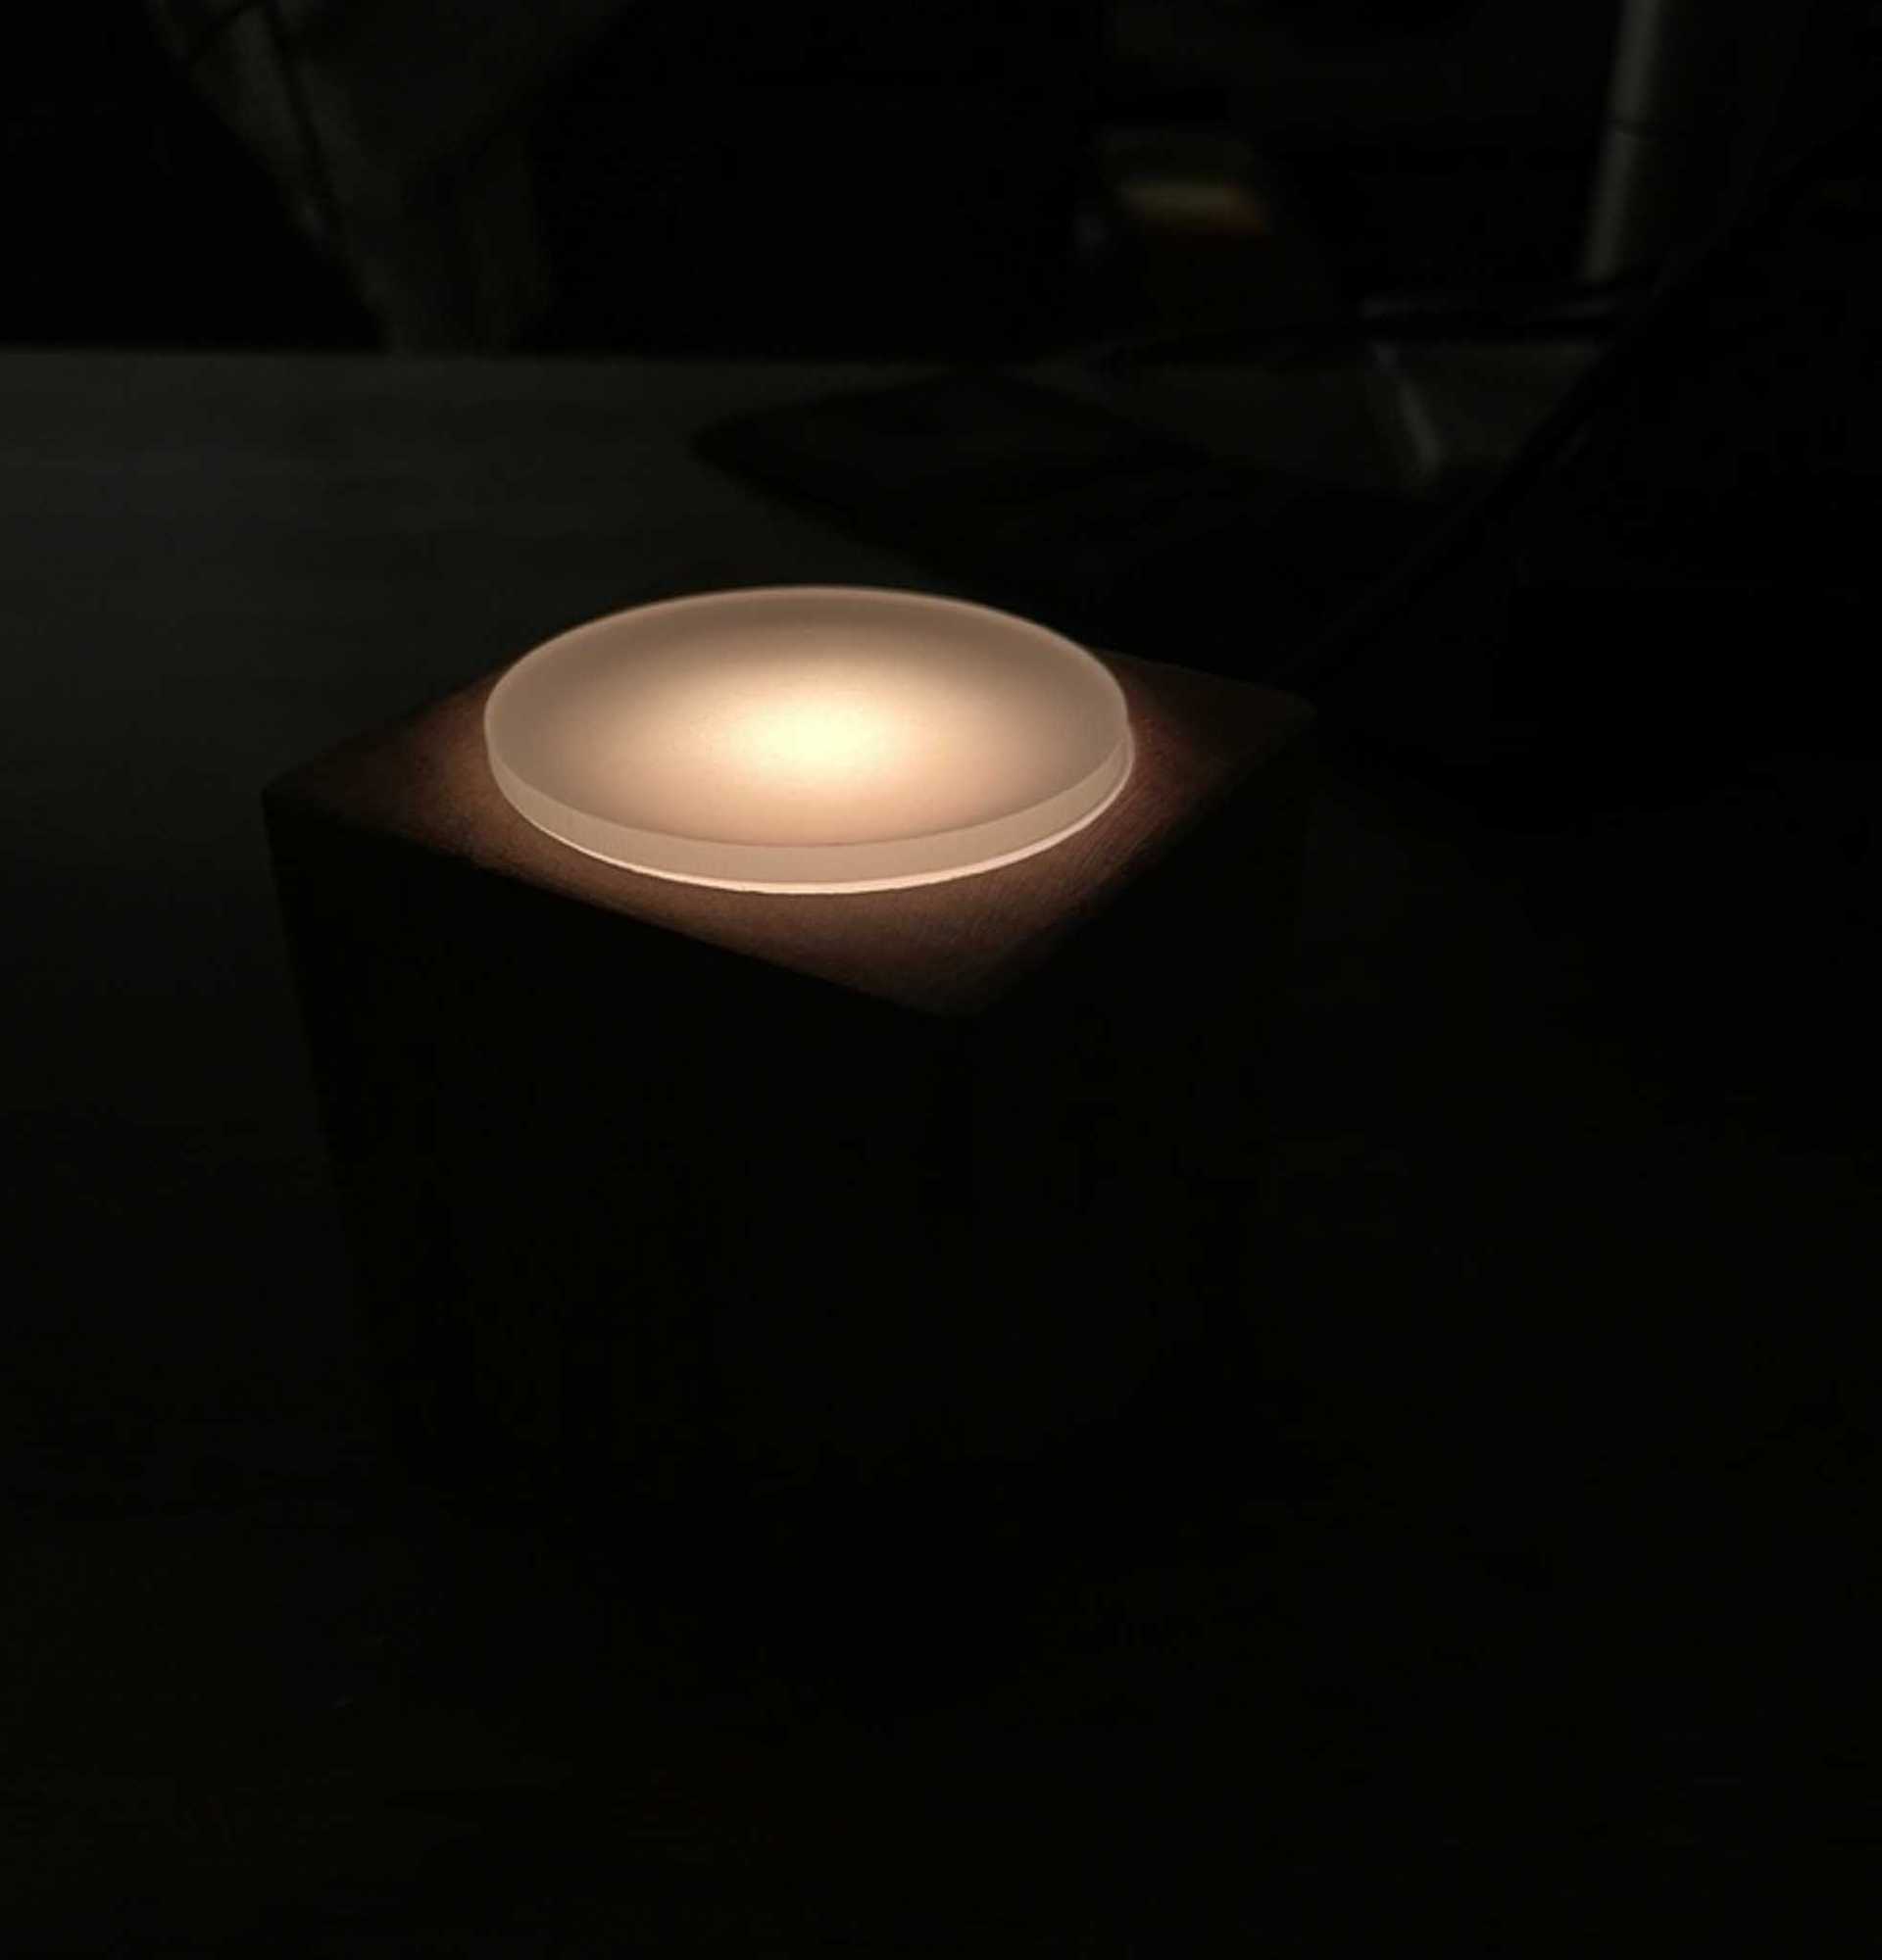 A Candle (Approximately)